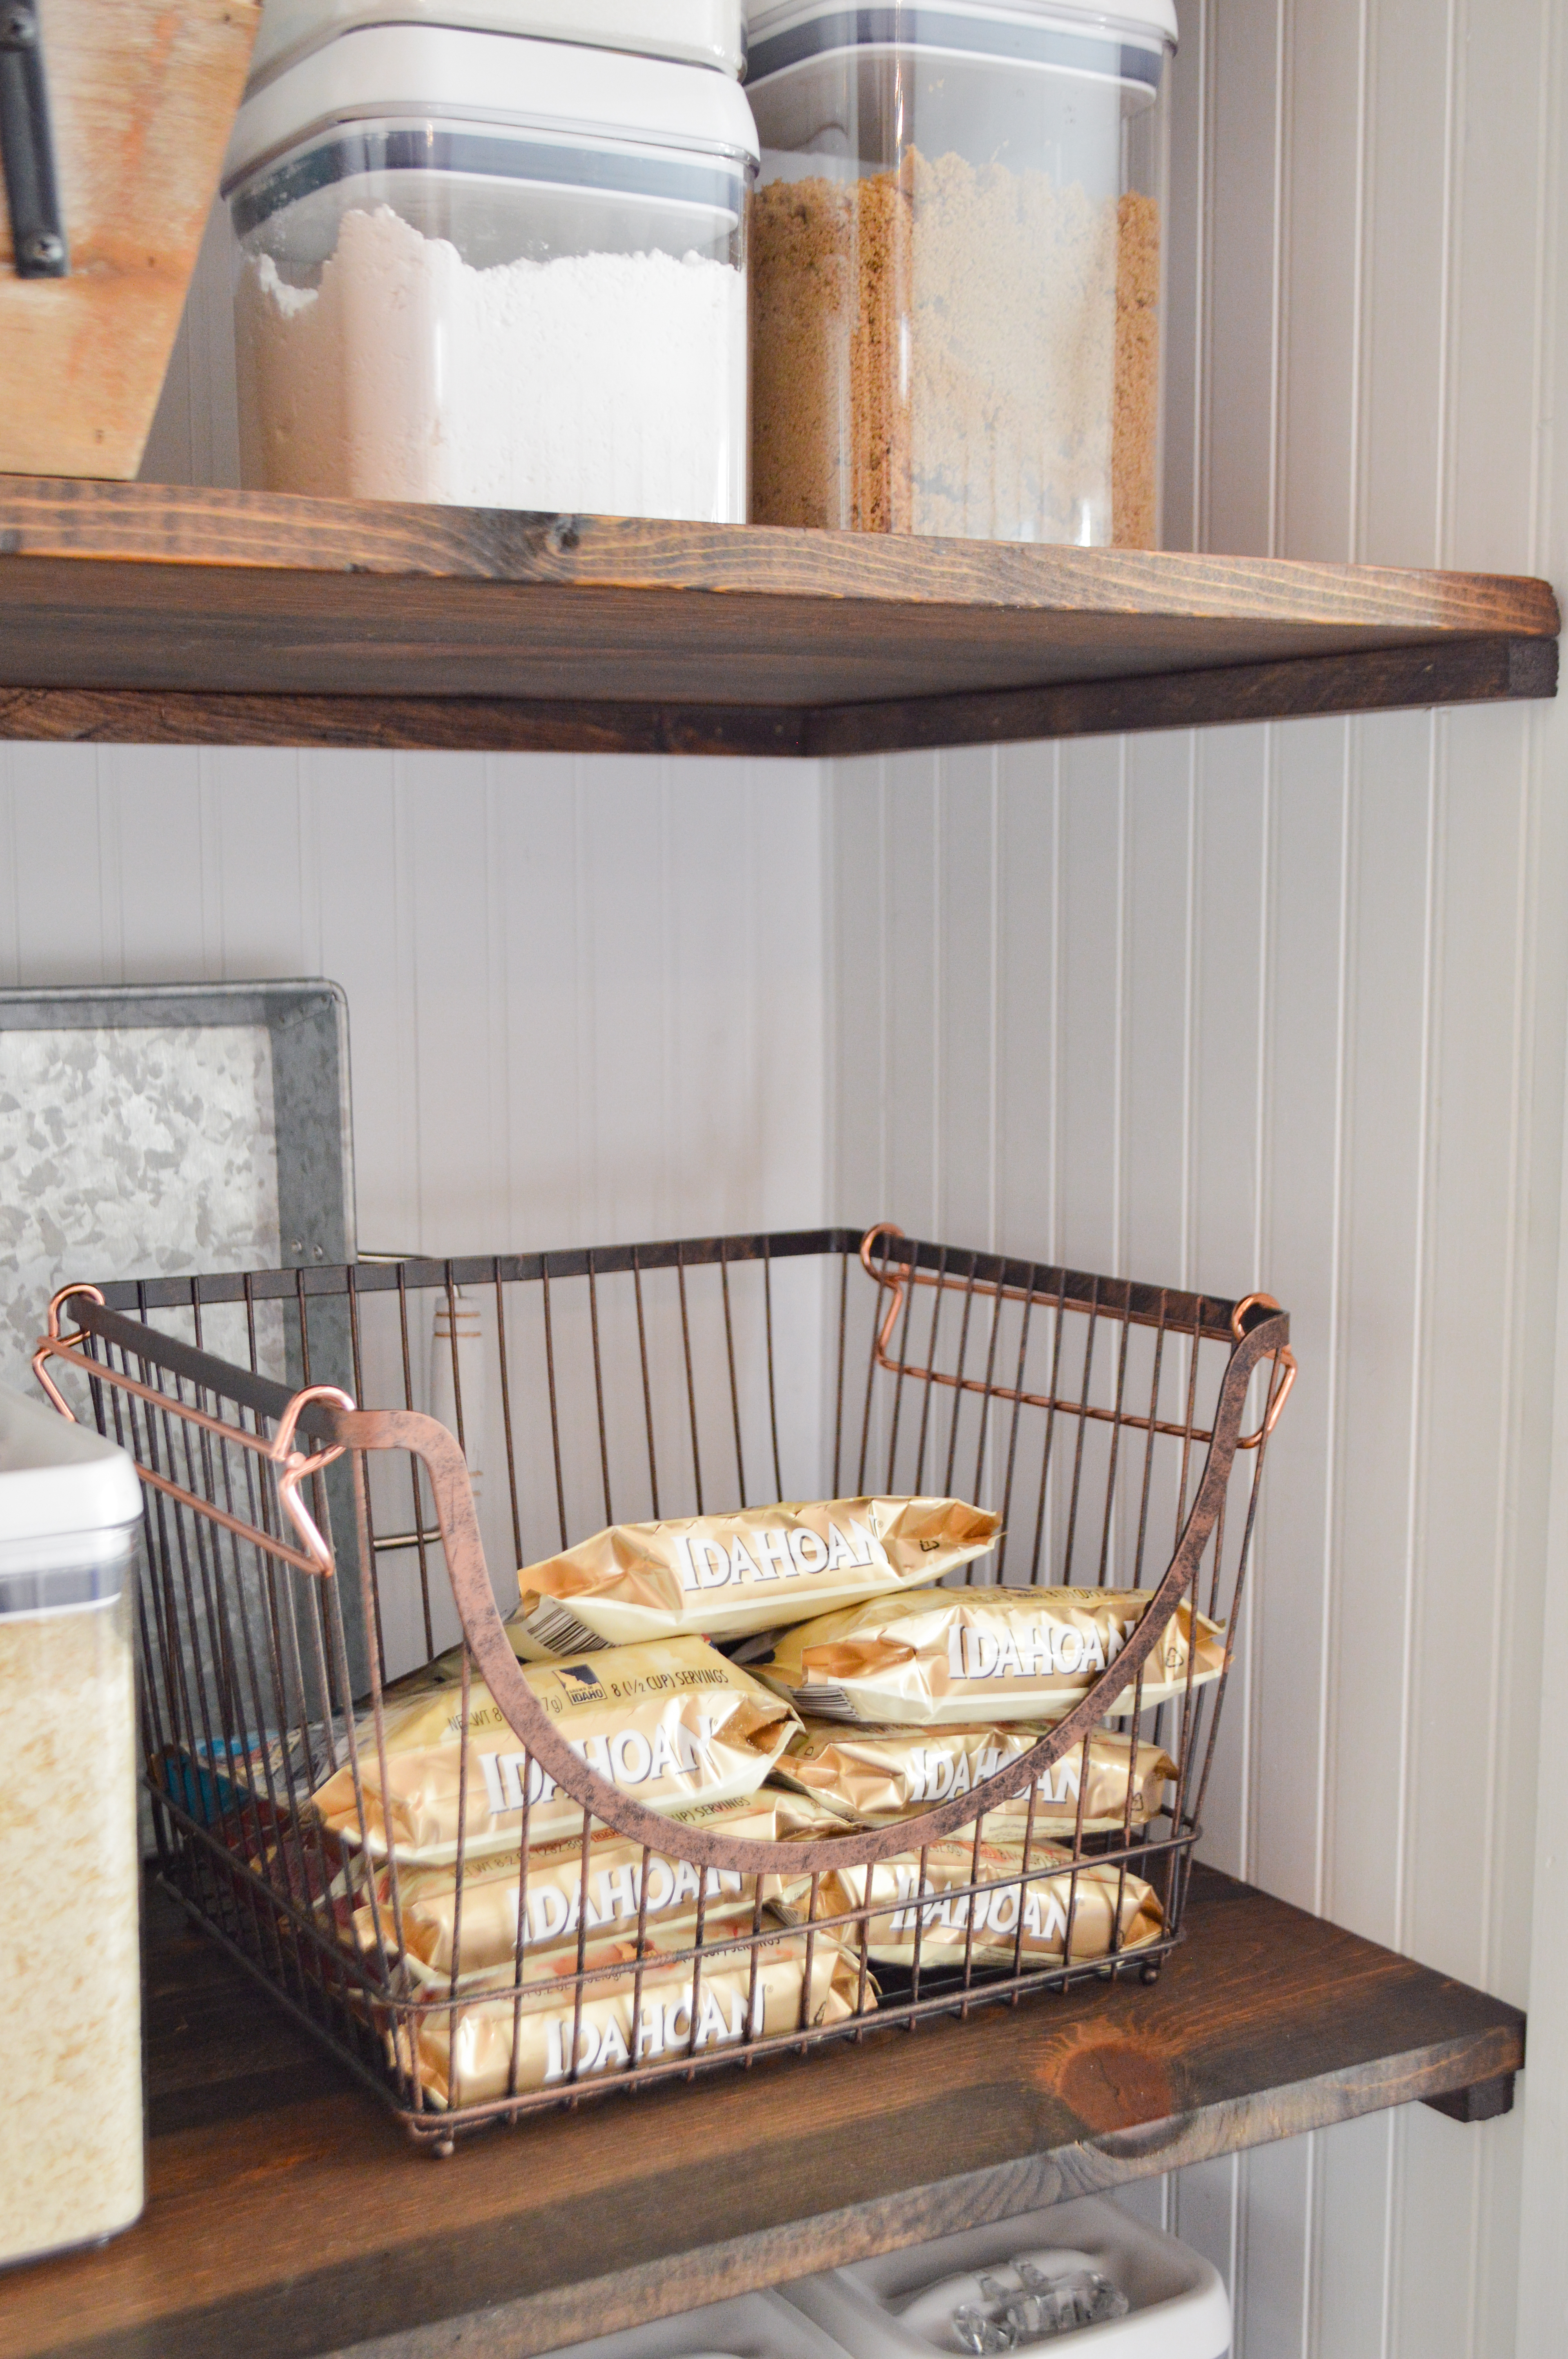 https://foxhollowcottage.com/wp-content/uploads/2020/01/DIY-Open-Shelf-Pantry-Easy-Affordable-Organized-Storage-Ideas-Fox-Hollow-Cottage-www.foxhollowcottage.com_-50.jpg